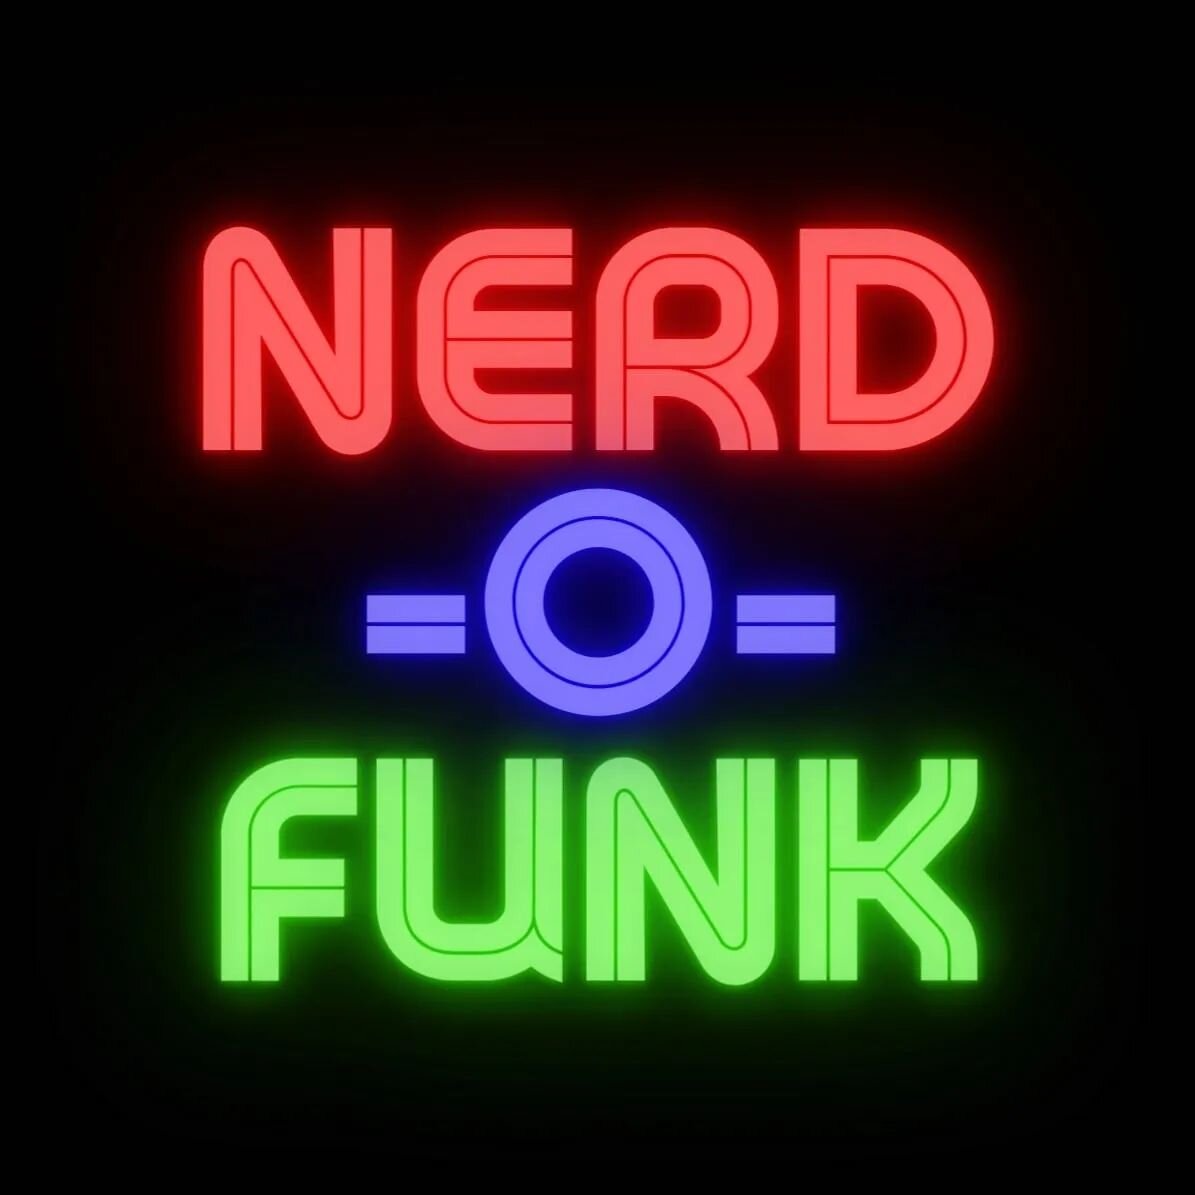 Hi, i am delighted to announce the launch of my t-shirt brand @nerdofunk. We make t-shirts for the genius in you! 

We will be launching our website soon where you could buy the t-shirts you love!

Please like and follow us on our journey. It would m